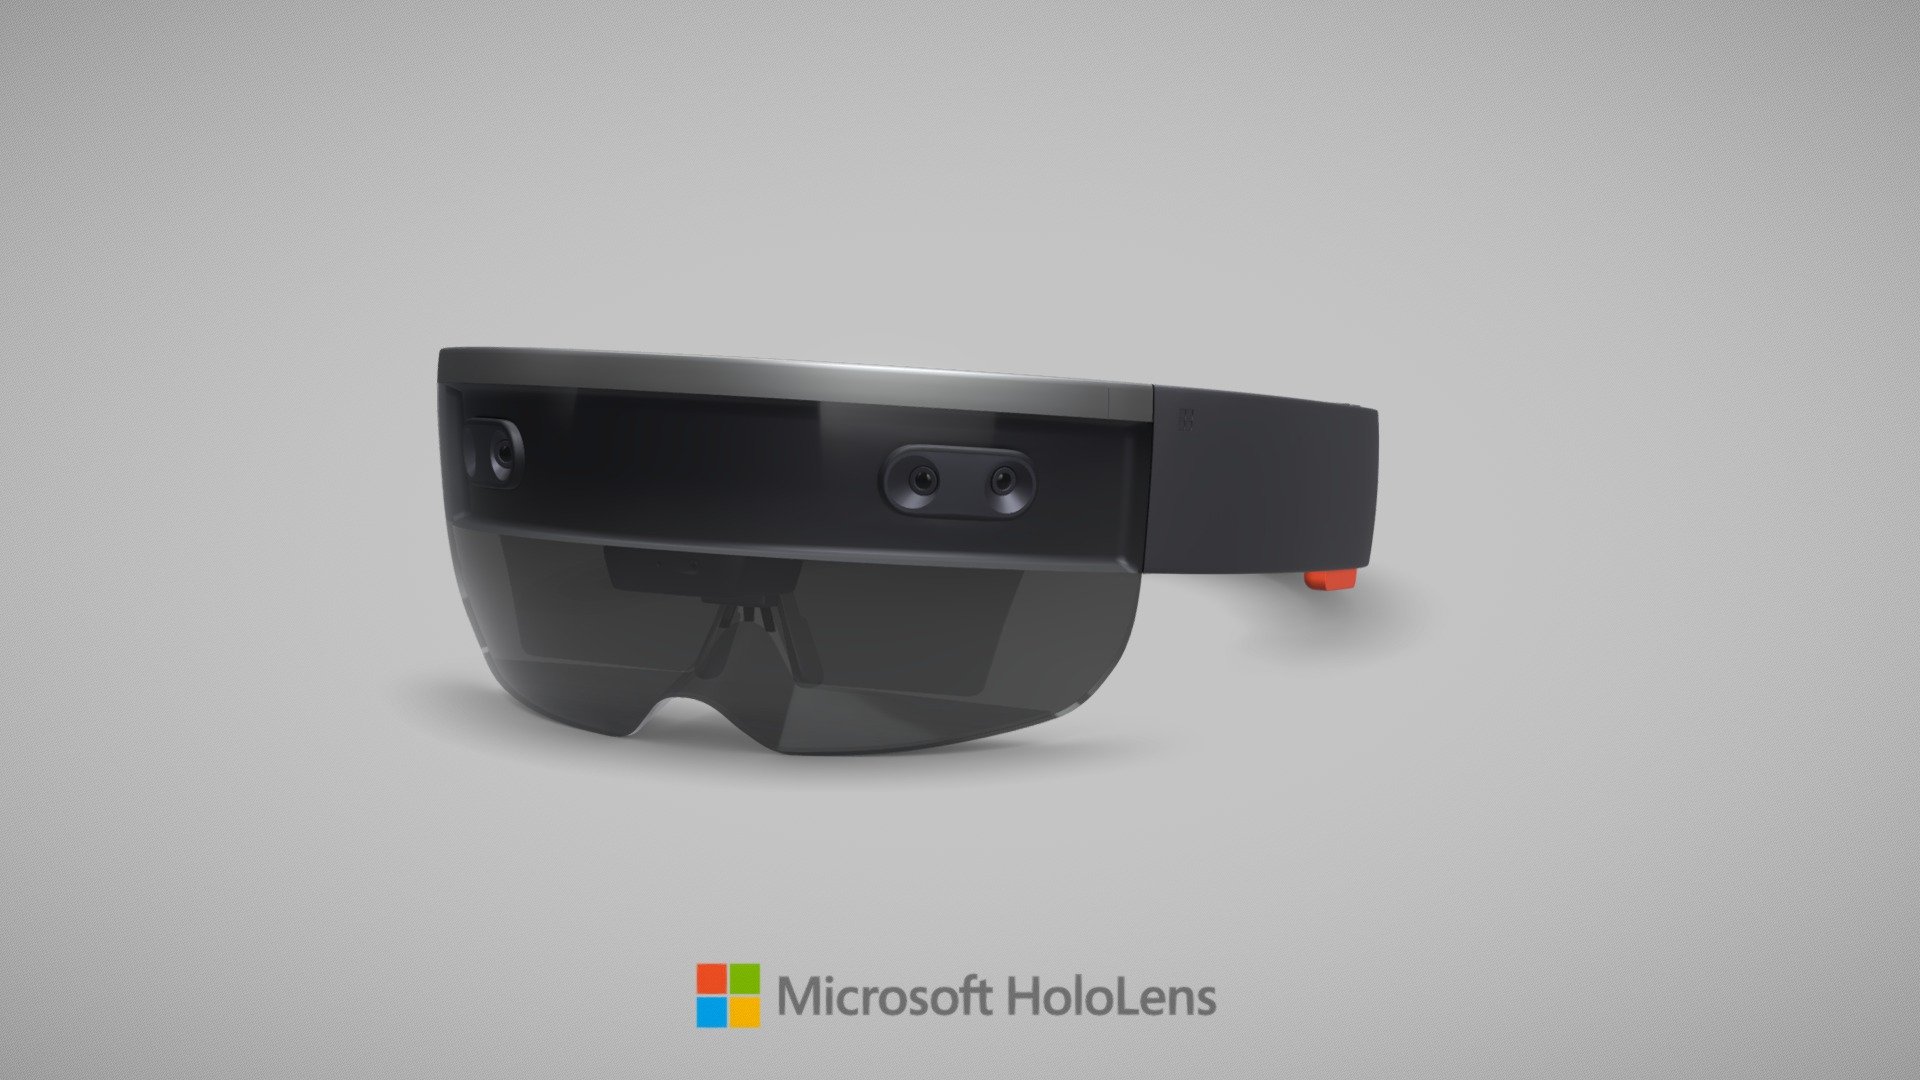 The era of holographic computing is here. When you change the way you see the world, you can change the world you see.

Read about our official partnership with Microsoft HoloLens here: http://blog.sketchfab.com/post/117707314264/sketchfab-teams-up-with-microsoft-hololens

[updated design based on new specs released on April 29th 2015] - Microsoft Hololens - Buy Royalty Free 3D model by Virtual Studio (@virtualstudio) 3d model